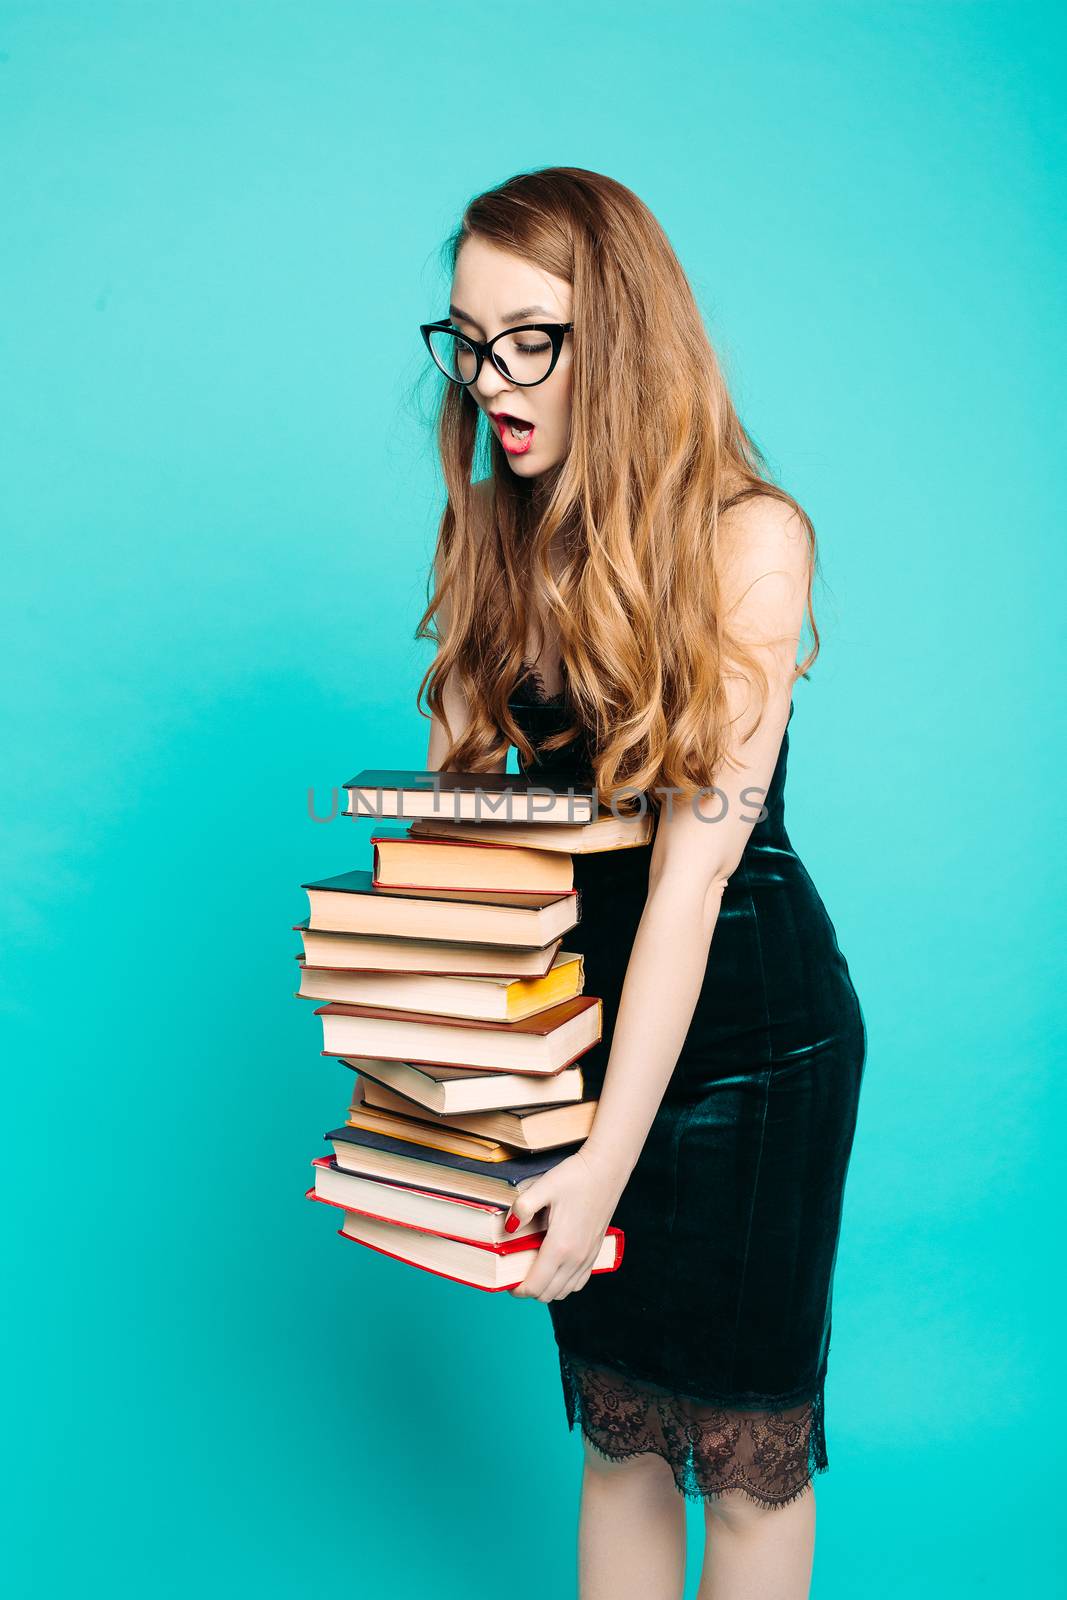 Portrait of emotionally shocked sexy teacher in dress with lace, eyeglasses, holding many books and surprised looking at camera. Young teacher or student screaming. Blue studio background.